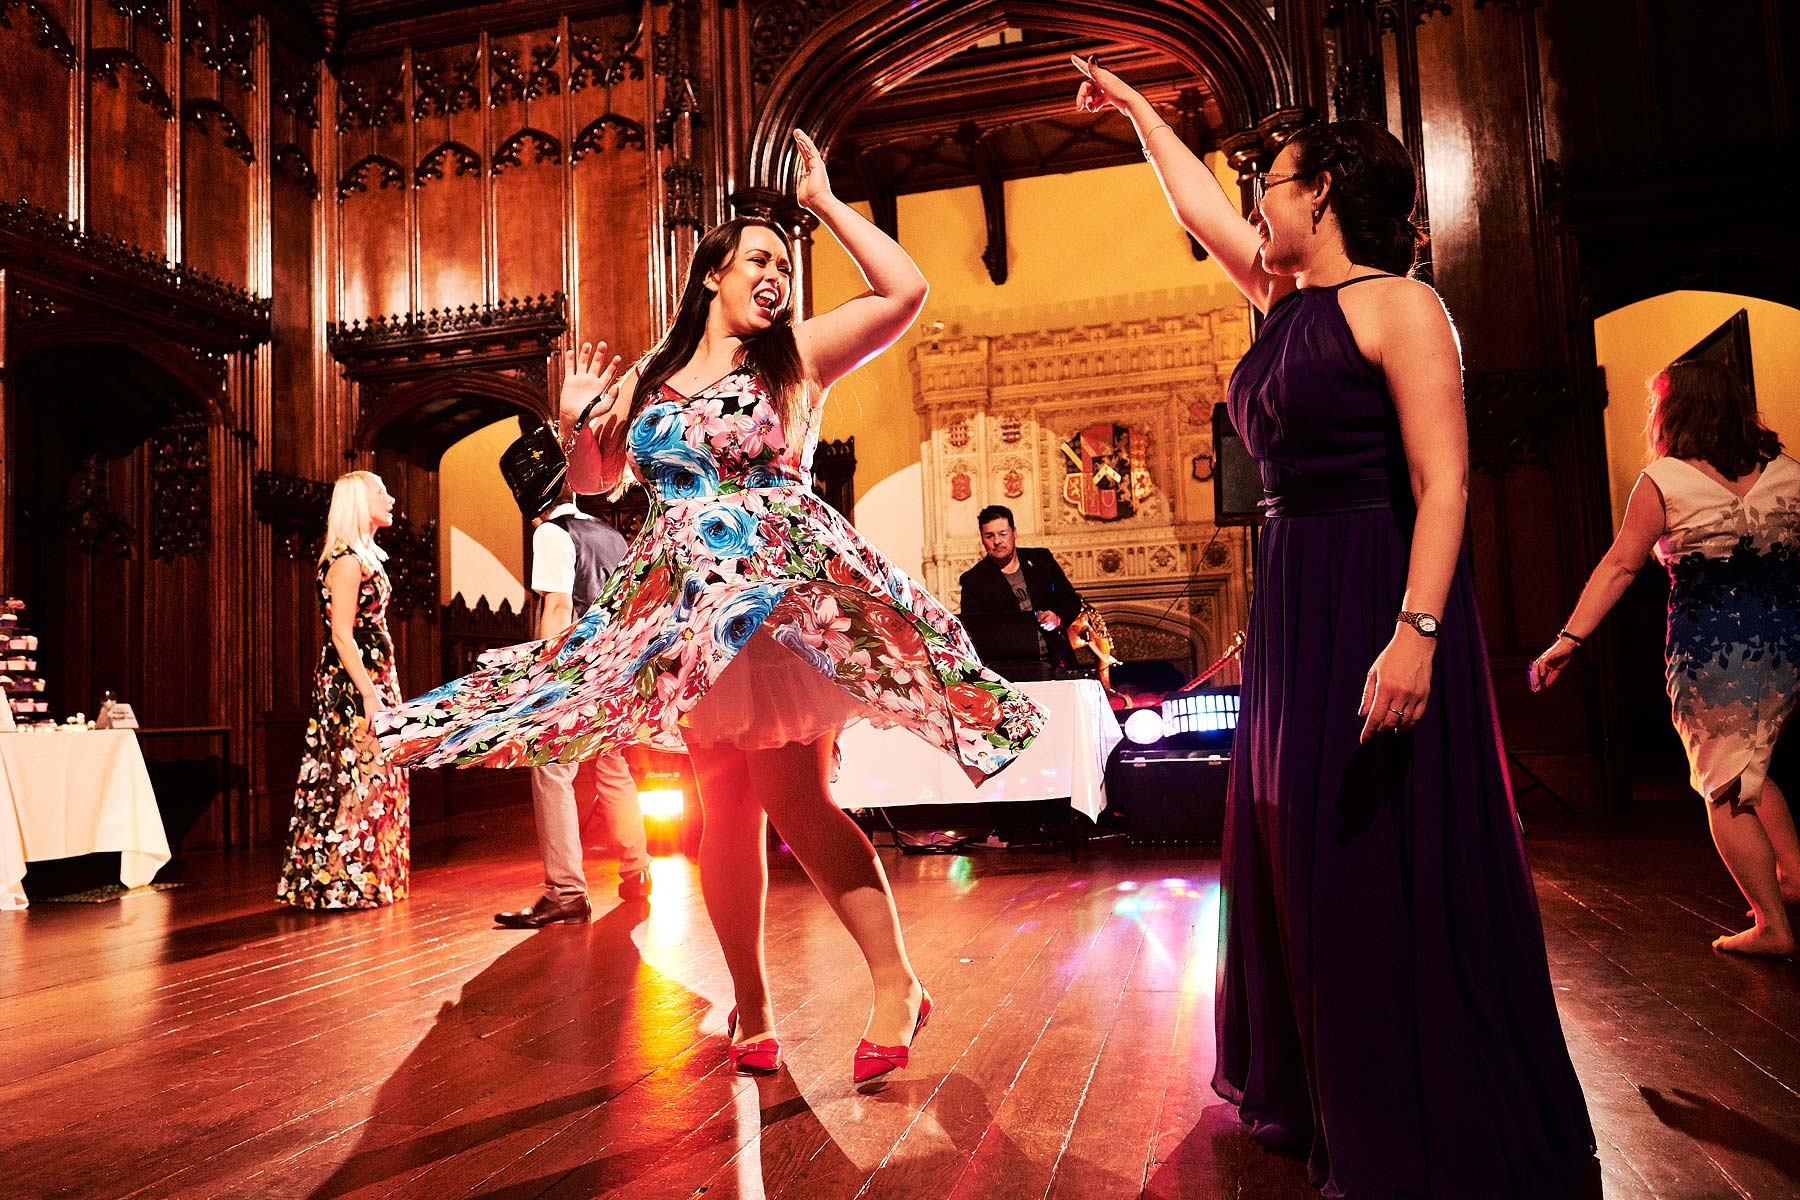 Fun moments captured into the night at Allerton Castle in Yorkshire by Documentary Wedding Photographer Stuart James